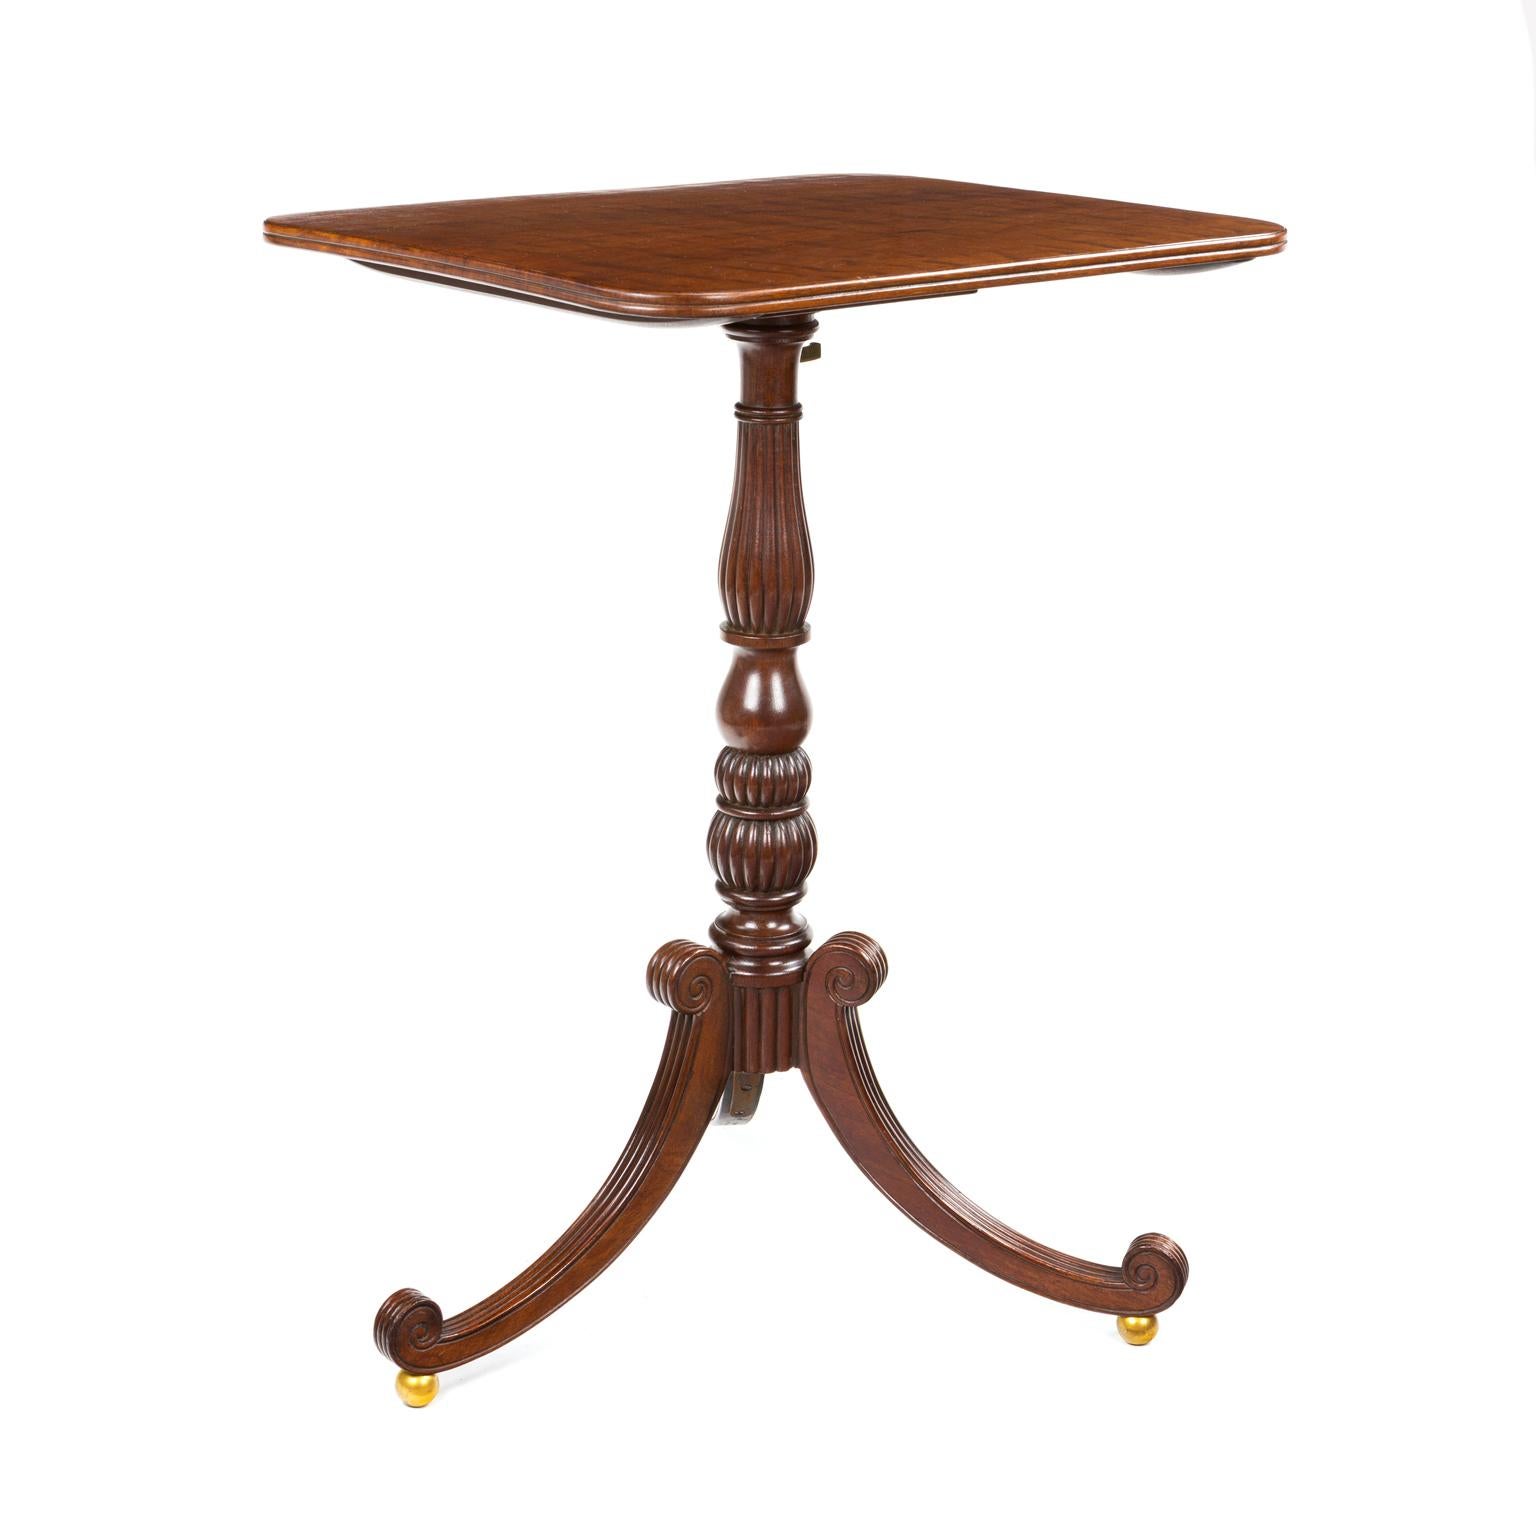 British Regency Pedestal Table Attributed to Gillows of Lancaster and London in Plumb Pu